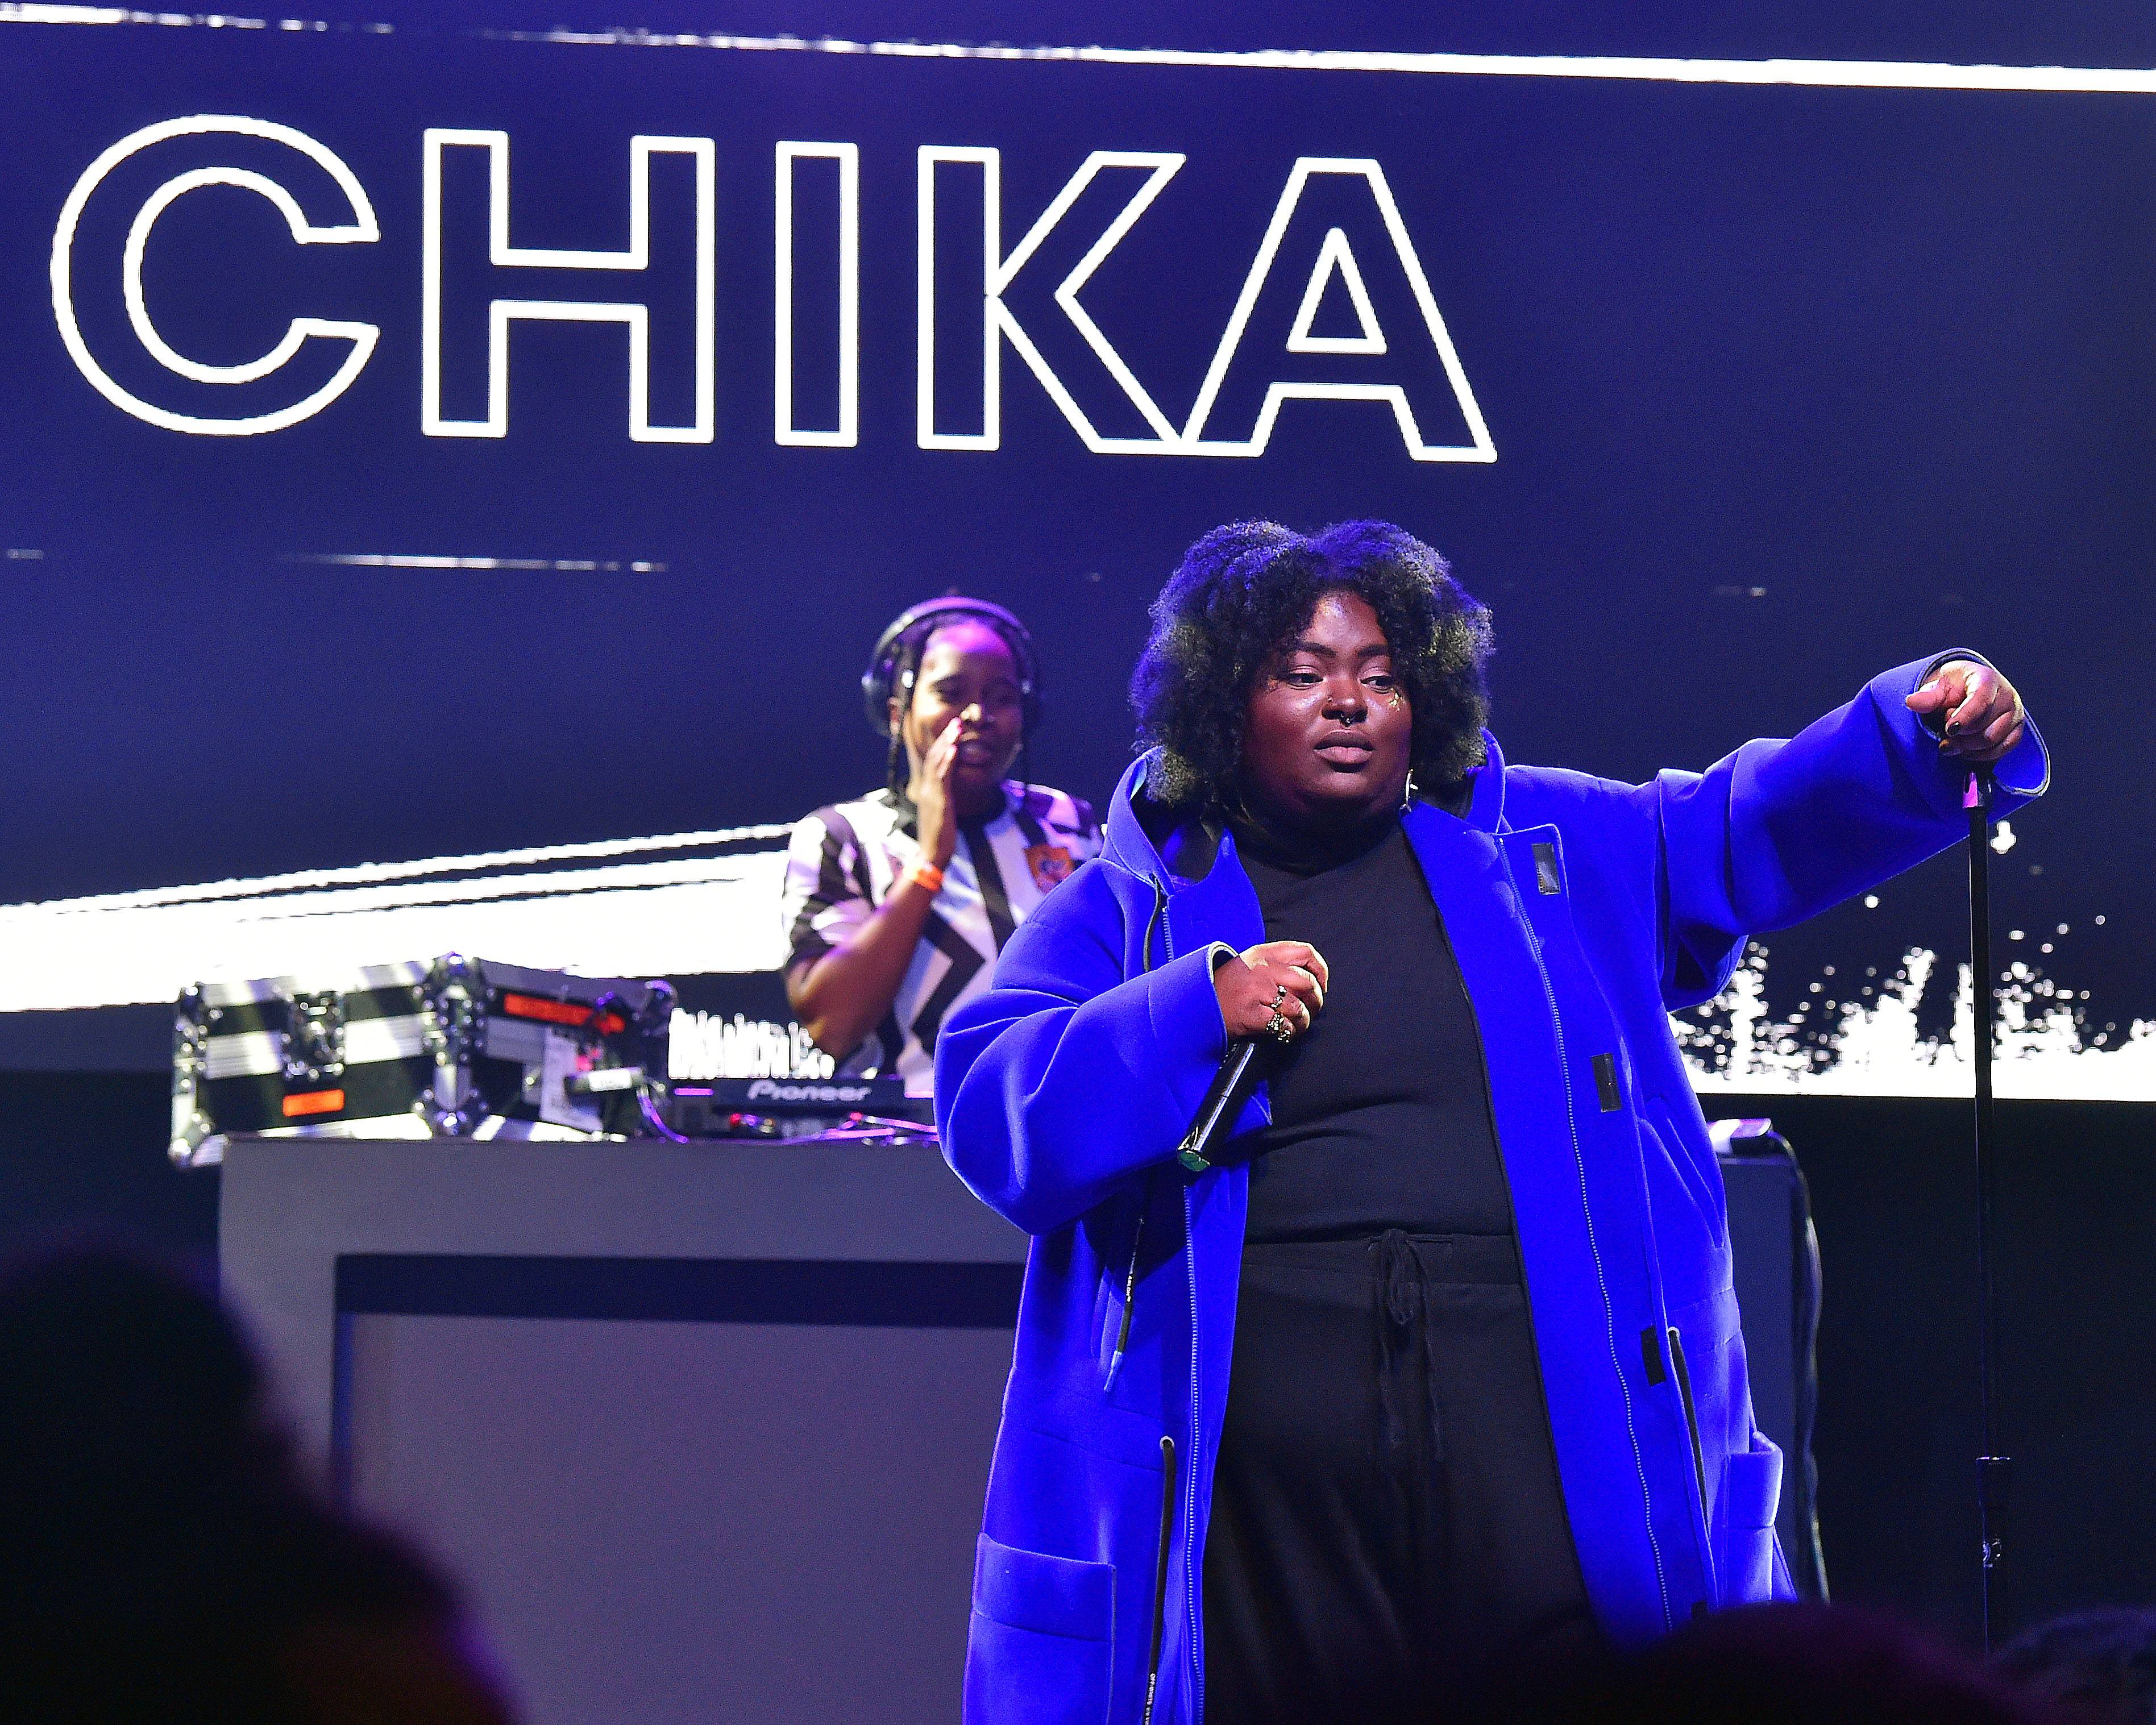 ATLANTA, GA - OCTOBER 09: Rapper Chika performs at 2019 A3C Festival & Conference / Fader Fort Women in Hip Hip at Center Stage on October 9, 2019 in Atlanta, Georgia.(Photo by Prince Williams/Getty Images)